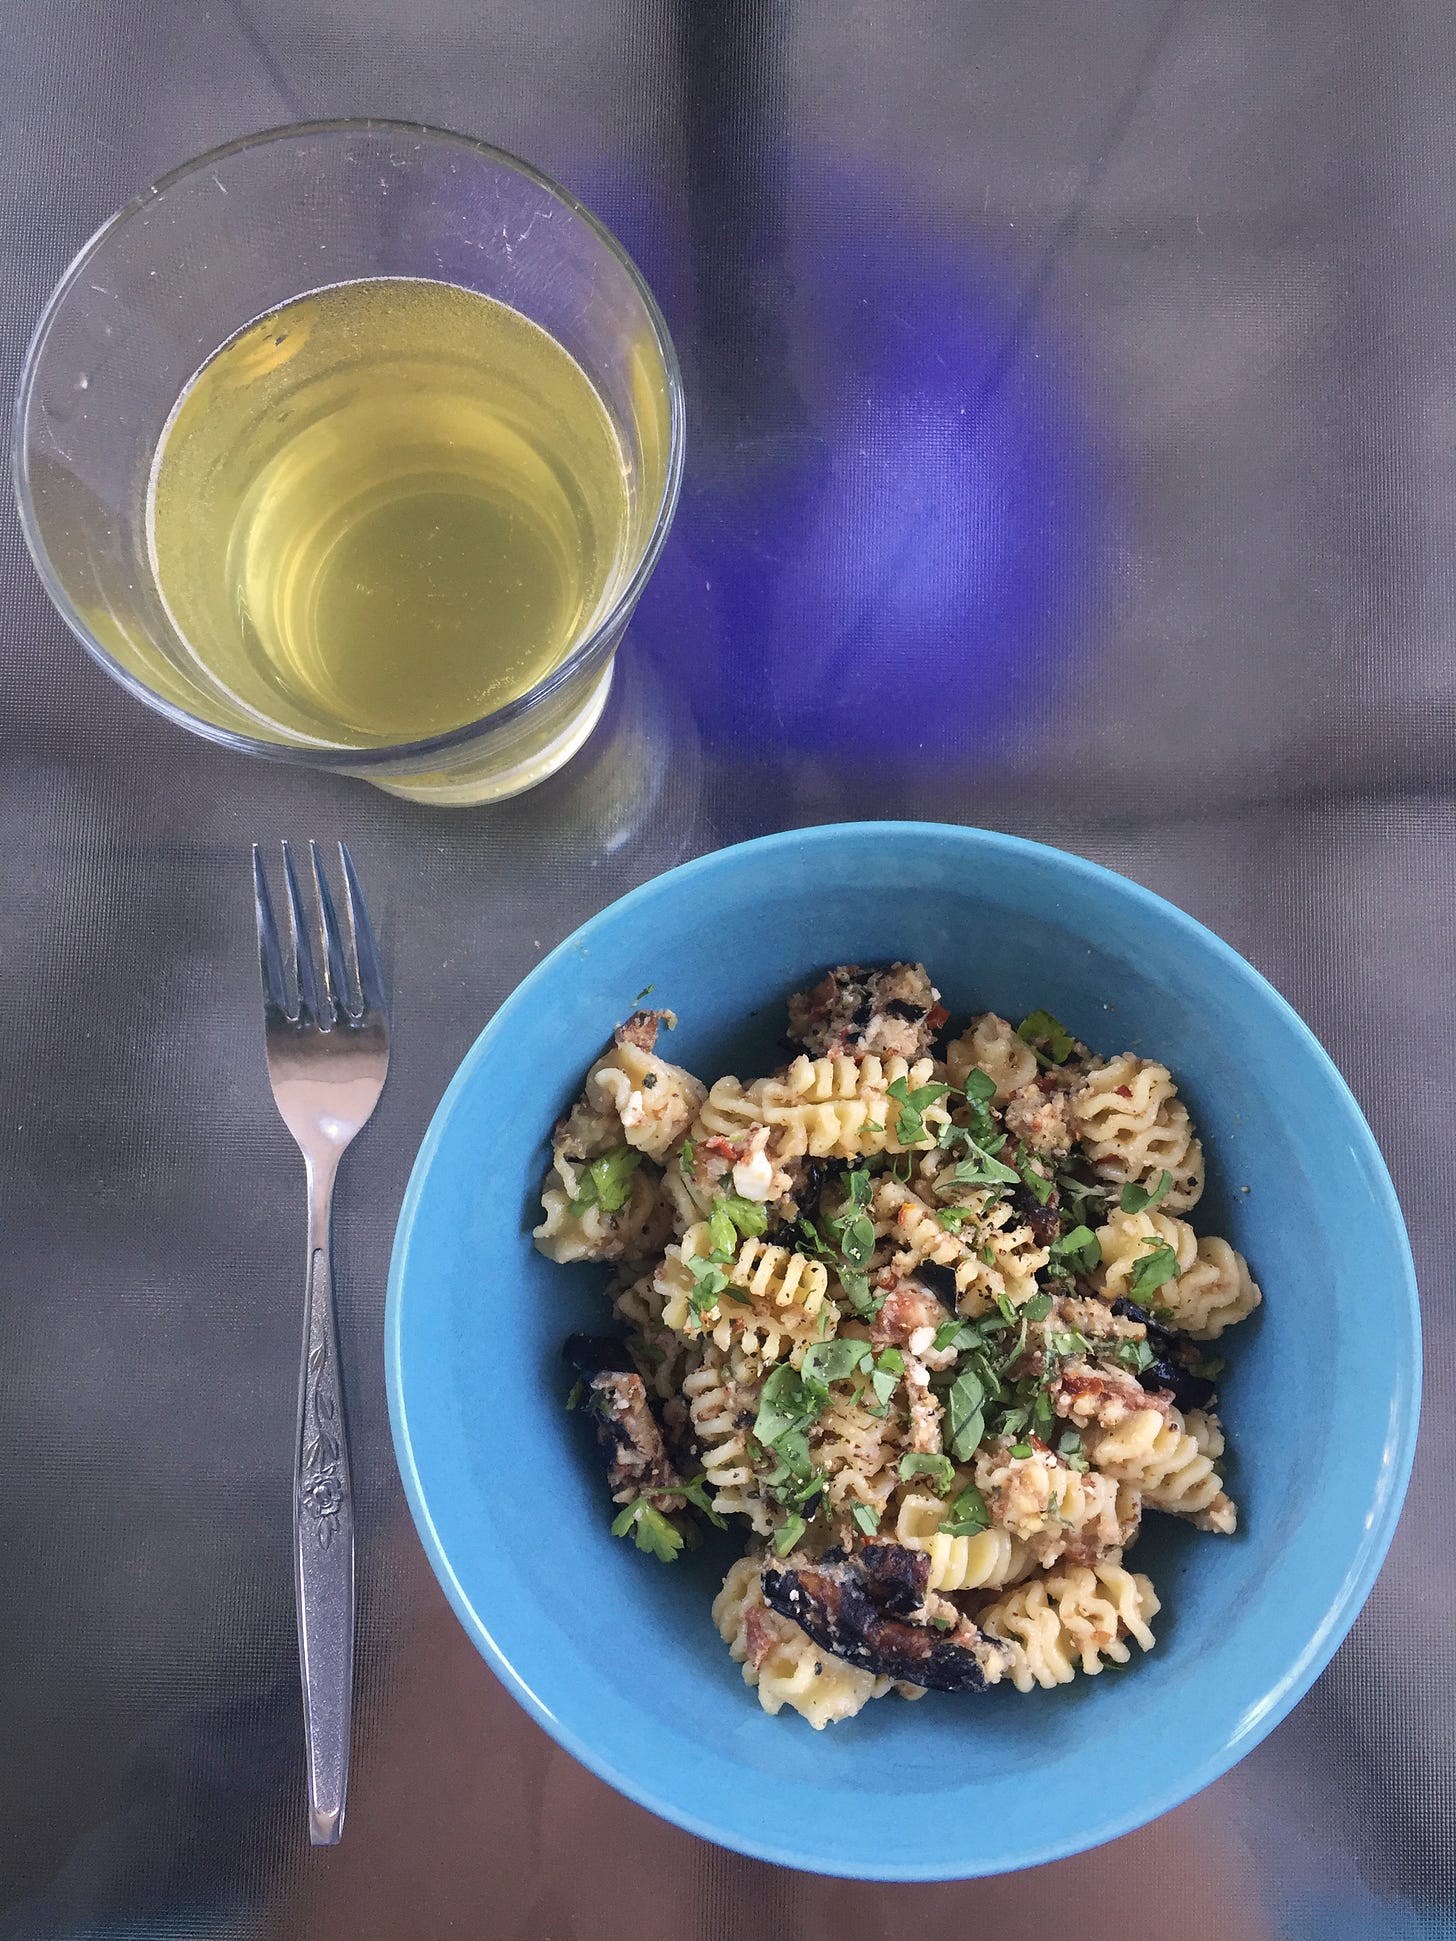 On an outdoor table, a blue bowl of pasta salad with radiatore and charred eggplant. Pieces of feta and lots of green herbs are visible throughout, along with small pieces of sun-dried tomato. Next to it is a glass of pale saison.